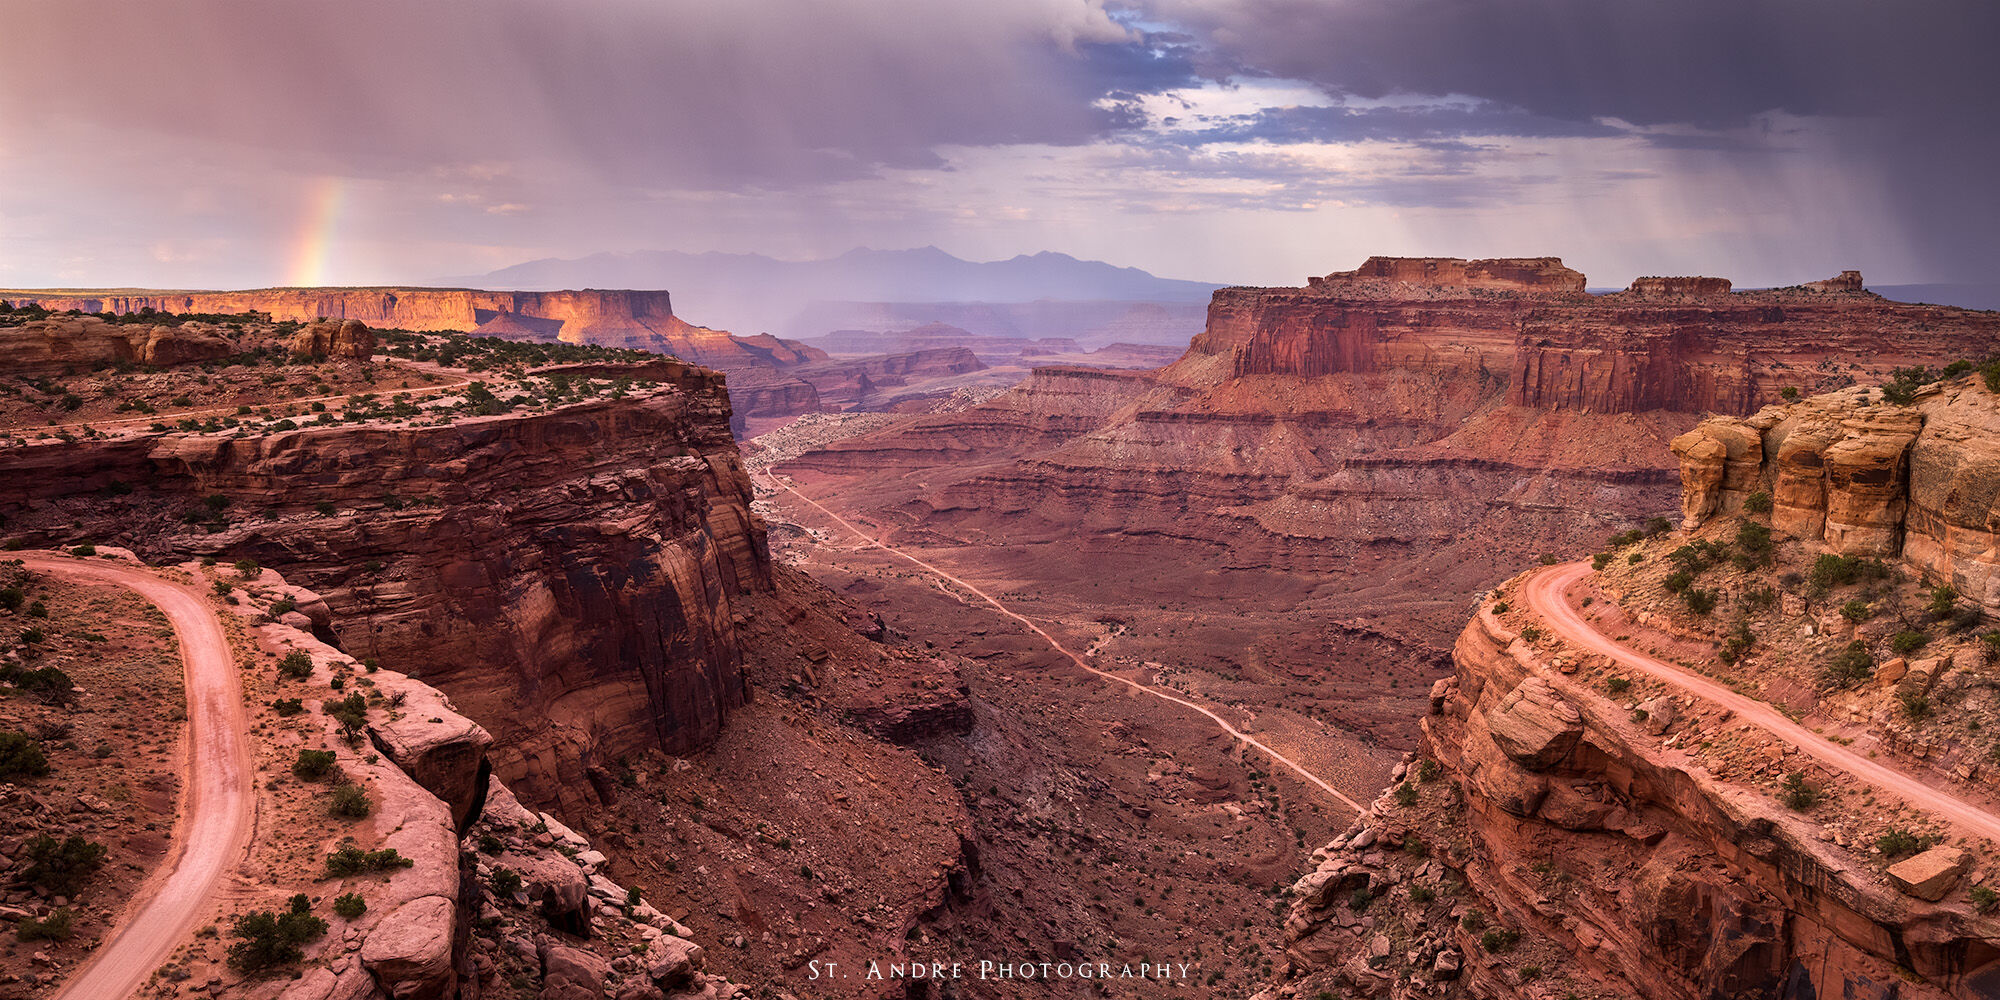 A dirt road winds down through canyons and cliffs with a large rainbow over the cliffs in the distance. 